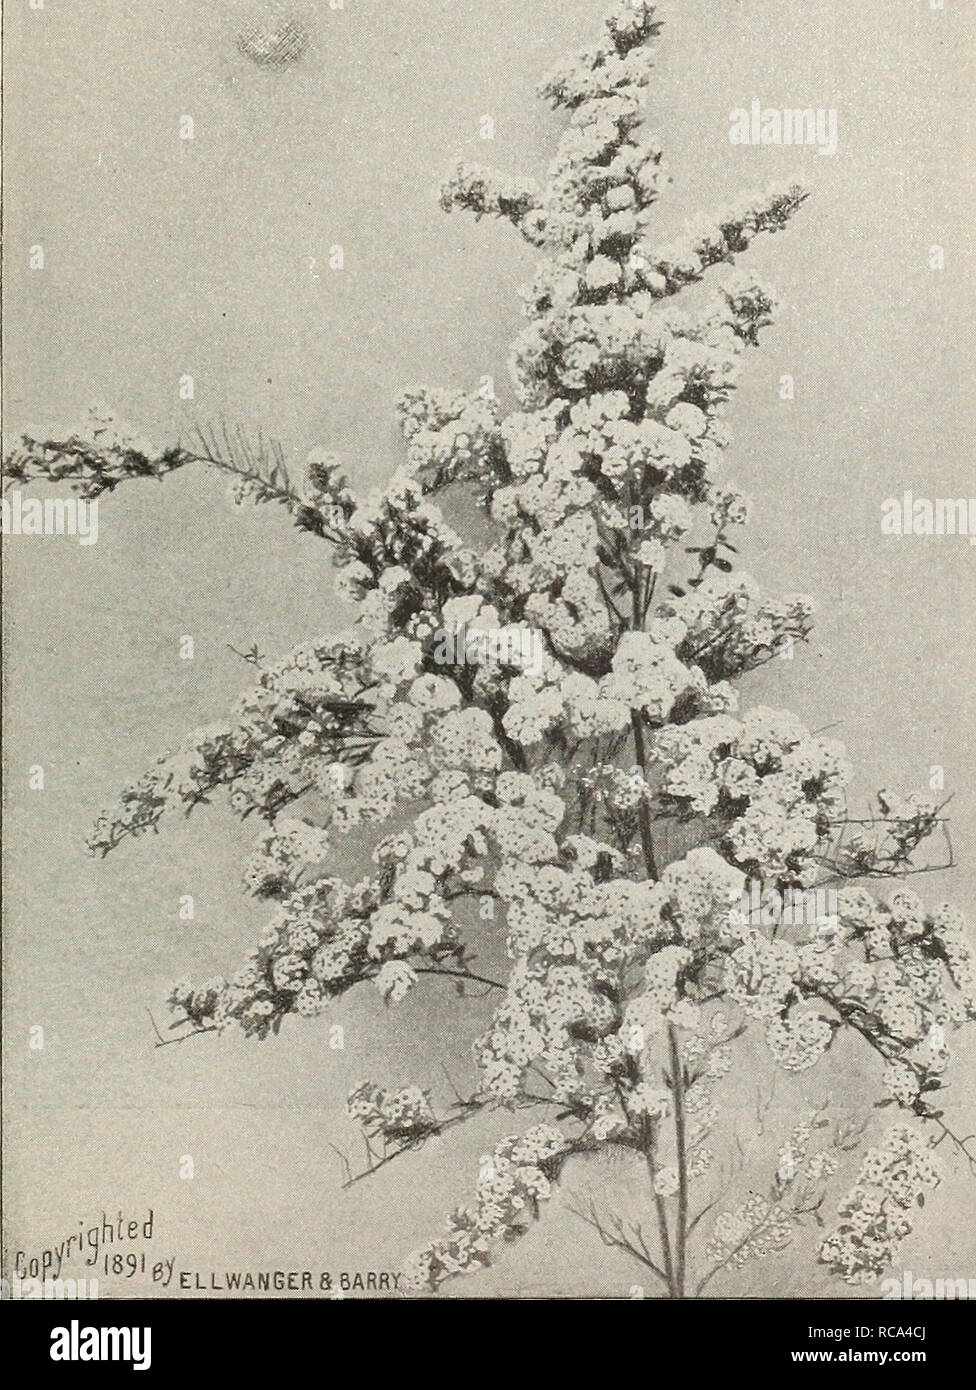 . [Ellwanger &amp; Barry's general catalogue]. GENERAL CATALOGUE. 95 Spiraea Thunbergii. THtJNBERG's SpiB^A. D. Of dwarf habit and rounded, graceful form; branches slender and somewhat drooping; follag-e narrow and yellowish trreen; flowers small, white, appearing early in spring, being one of the first Spirseas to flower. Esteemed on account of its neat, graceful habit. Forces well in winter. 35c. S. trilobata. Three-lobbd Ppir^a. D. A vigorous grower. Three-lobed leaves; white flowers. 3oc. S. ulmifolia. Elm-leaved SpiRjEA. D. Leaves somewhat resembling those of the elm, and large, round clu Stock Photo